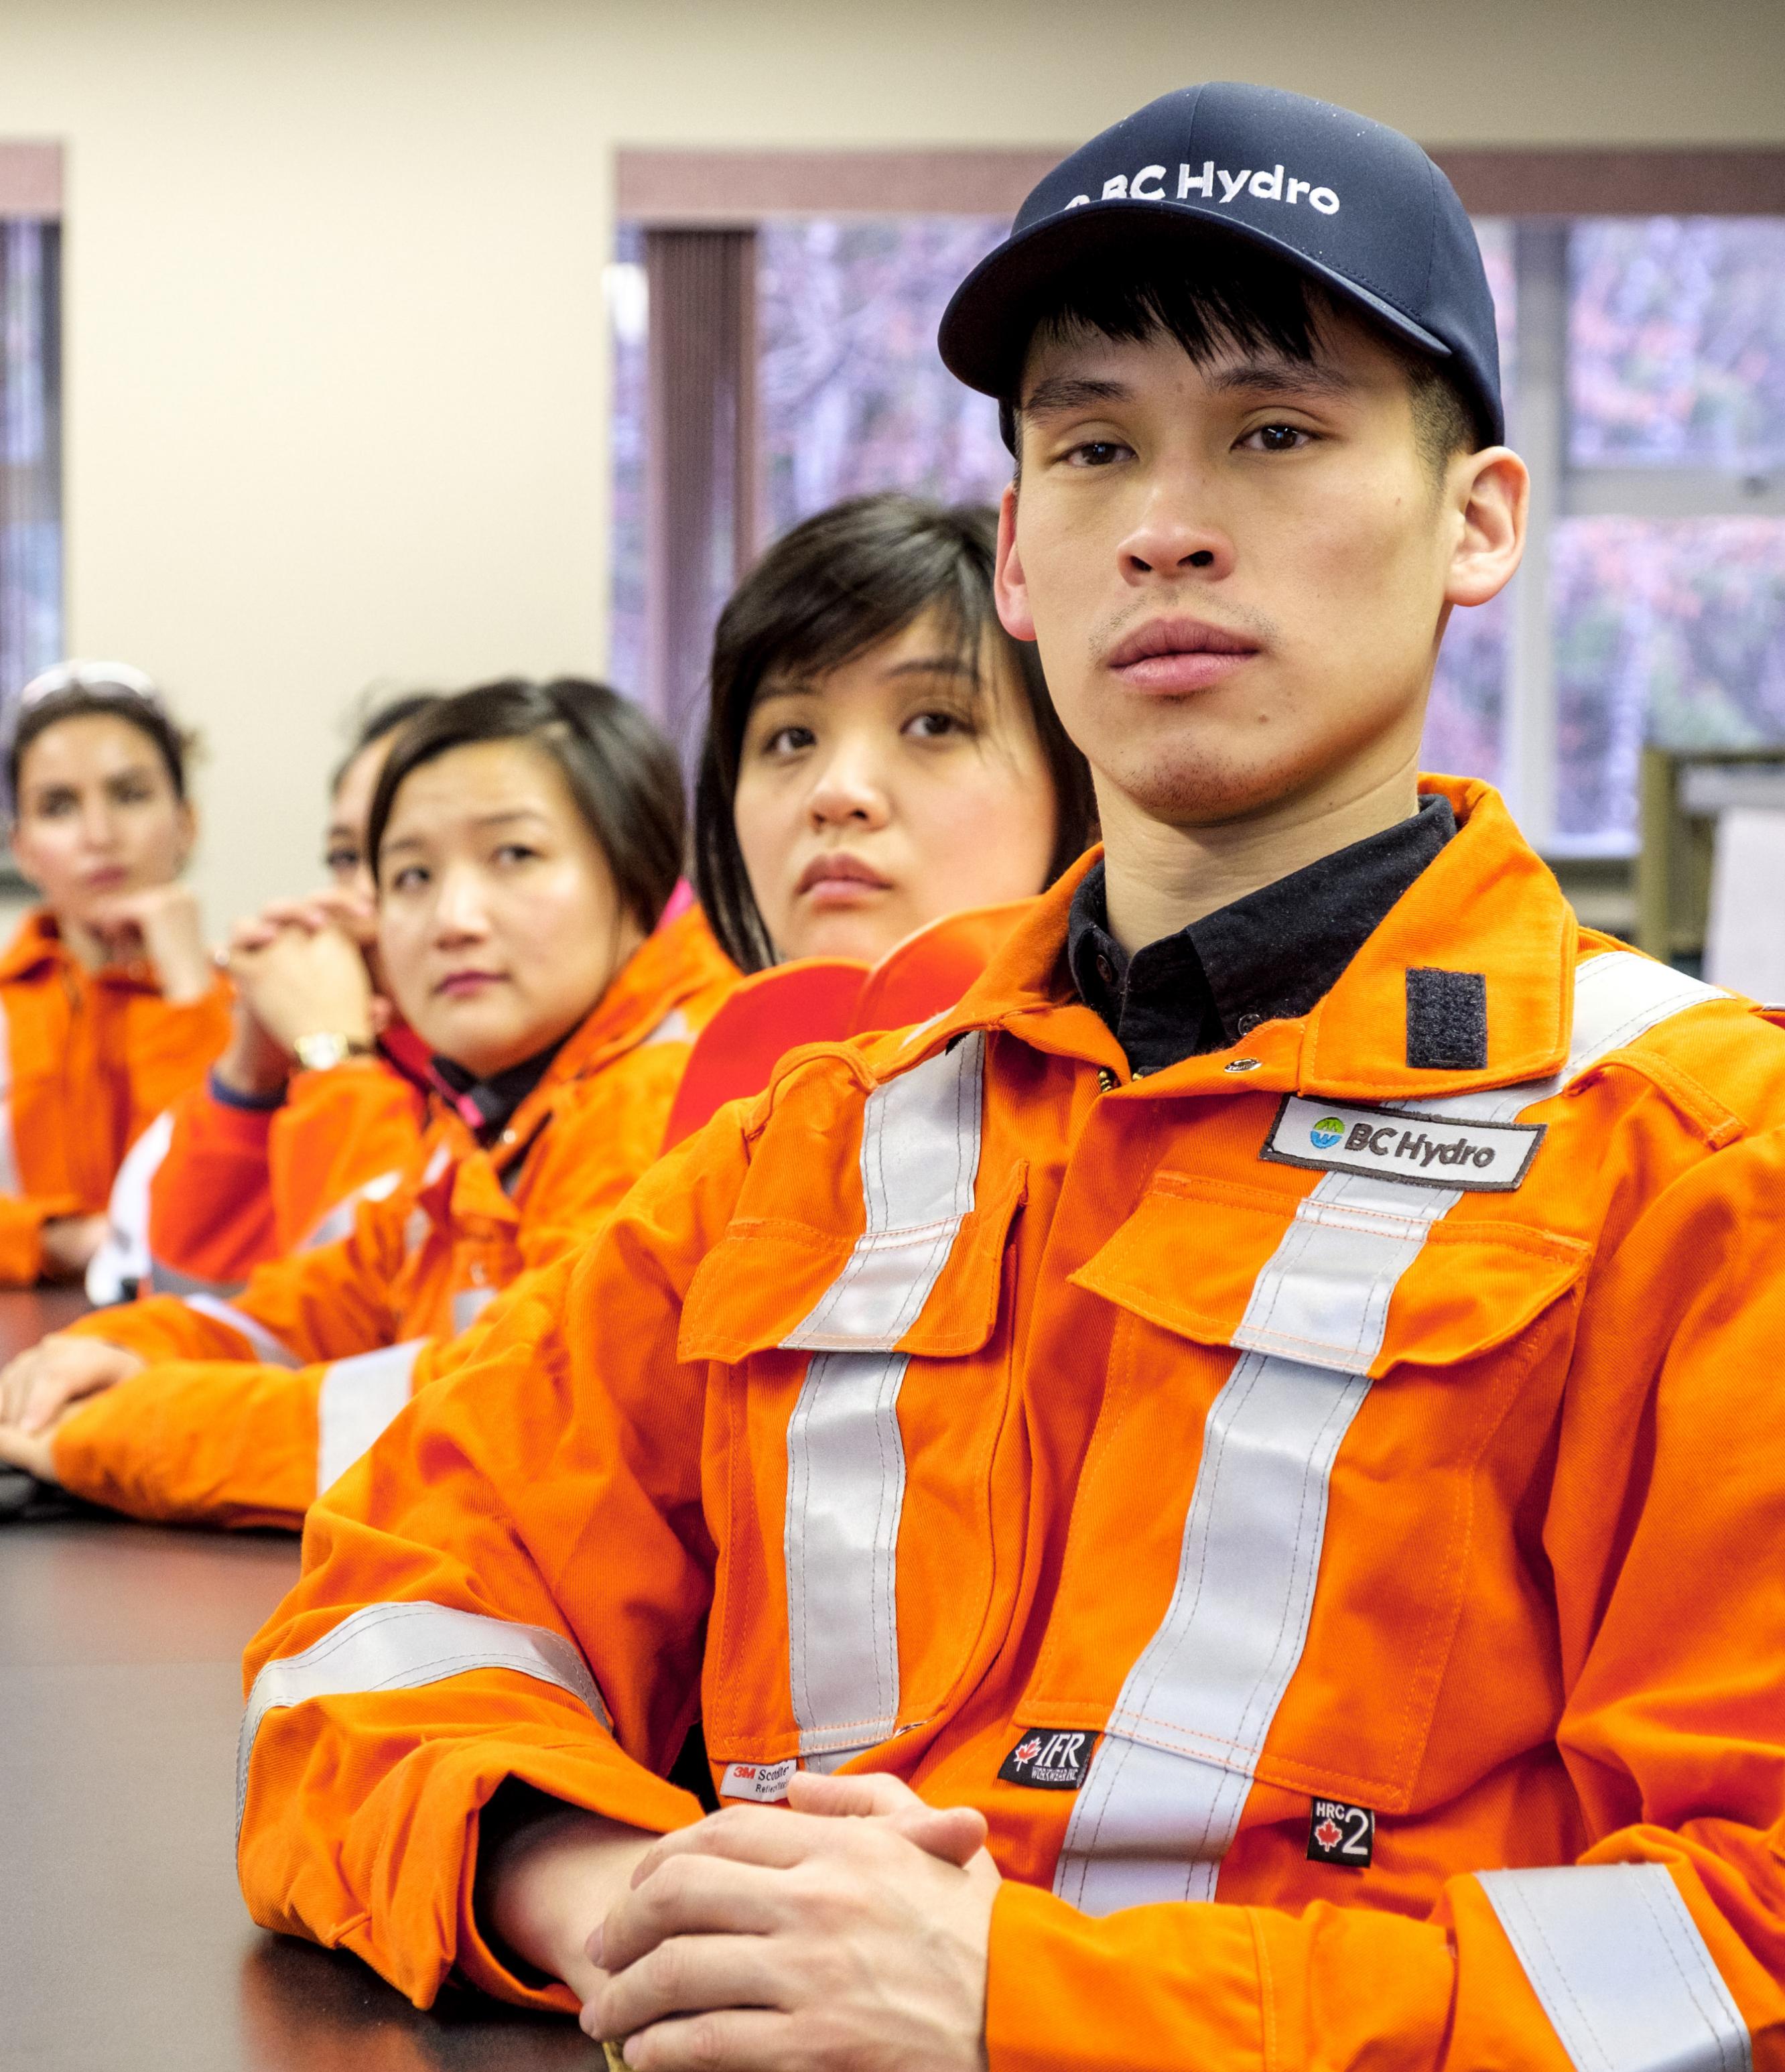 Several BC Hydro employees wearing orange safety jackets, sitting in a room together and facing the camera.